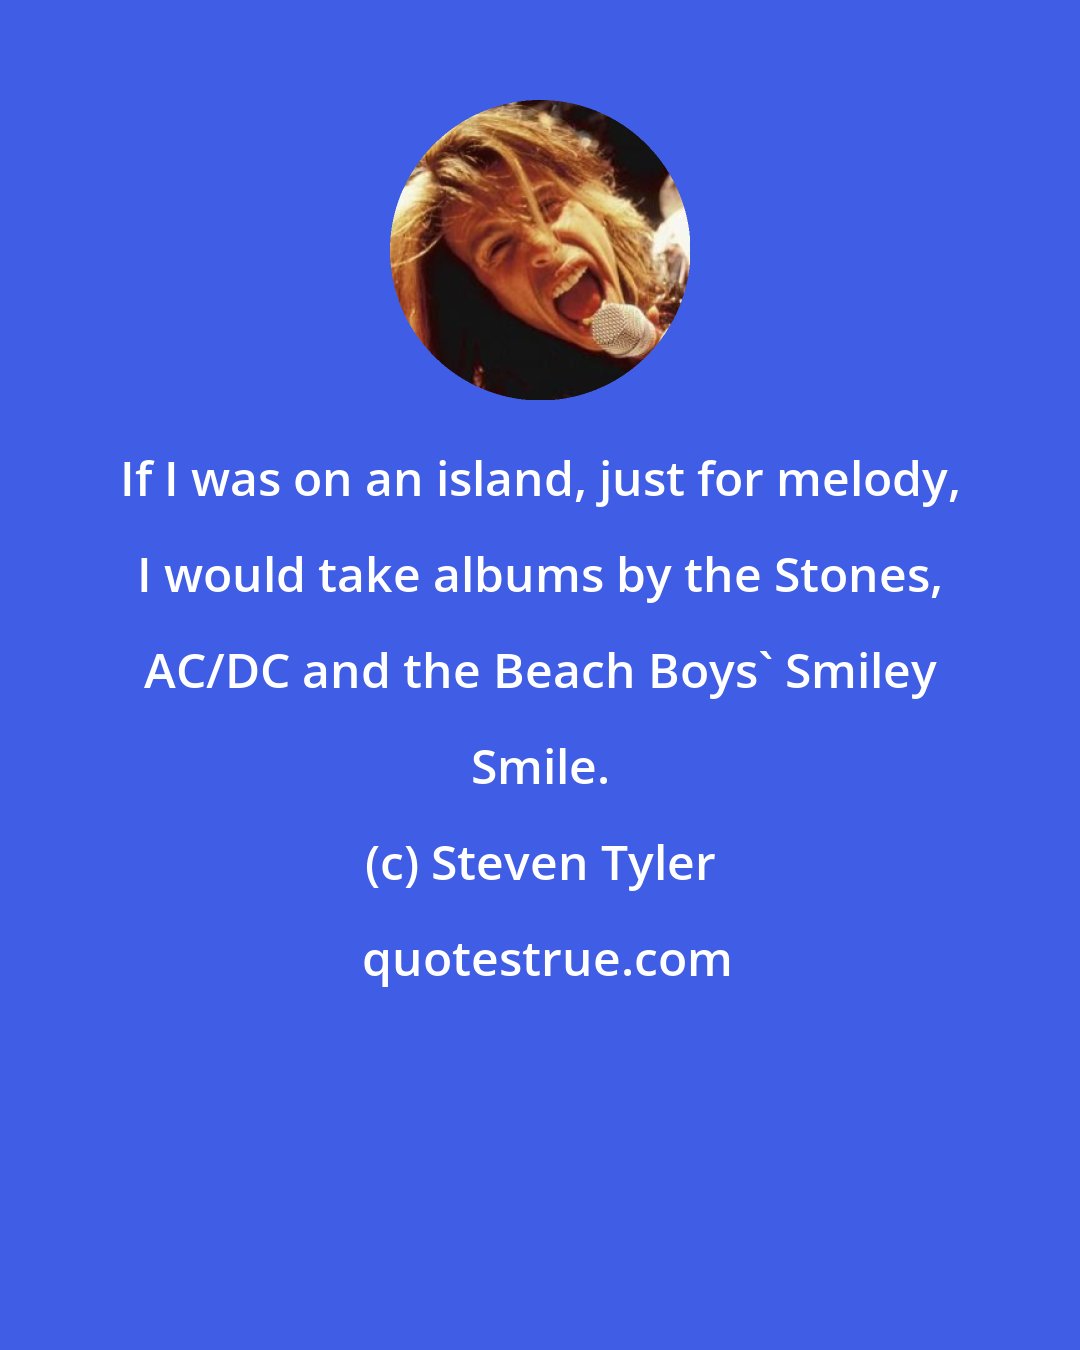 Steven Tyler: If I was on an island, just for melody, I would take albums by the Stones, AC/DC and the Beach Boys' Smiley Smile.